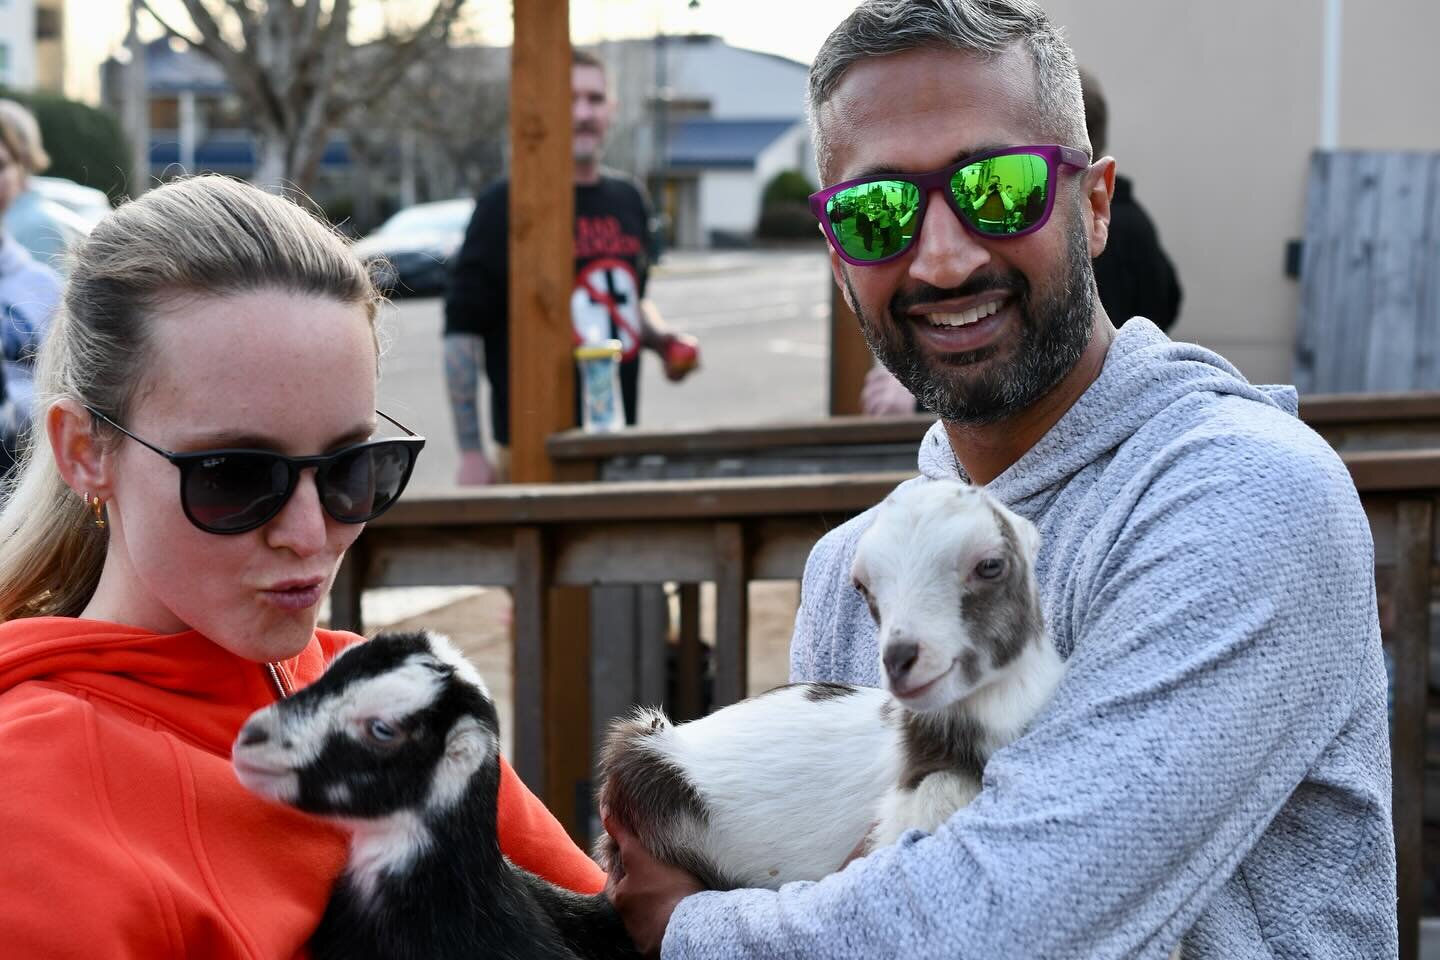 Baby goats are taking over the pub from 5pm-8pm this evening!
🐐🐐🐐🐐🐐🐐
There is so much more space available for everyone to enjoy baby goat cuddles this year! 
.
Tap trailer is set up as a second serving station outside with @frankoshotdogs righ